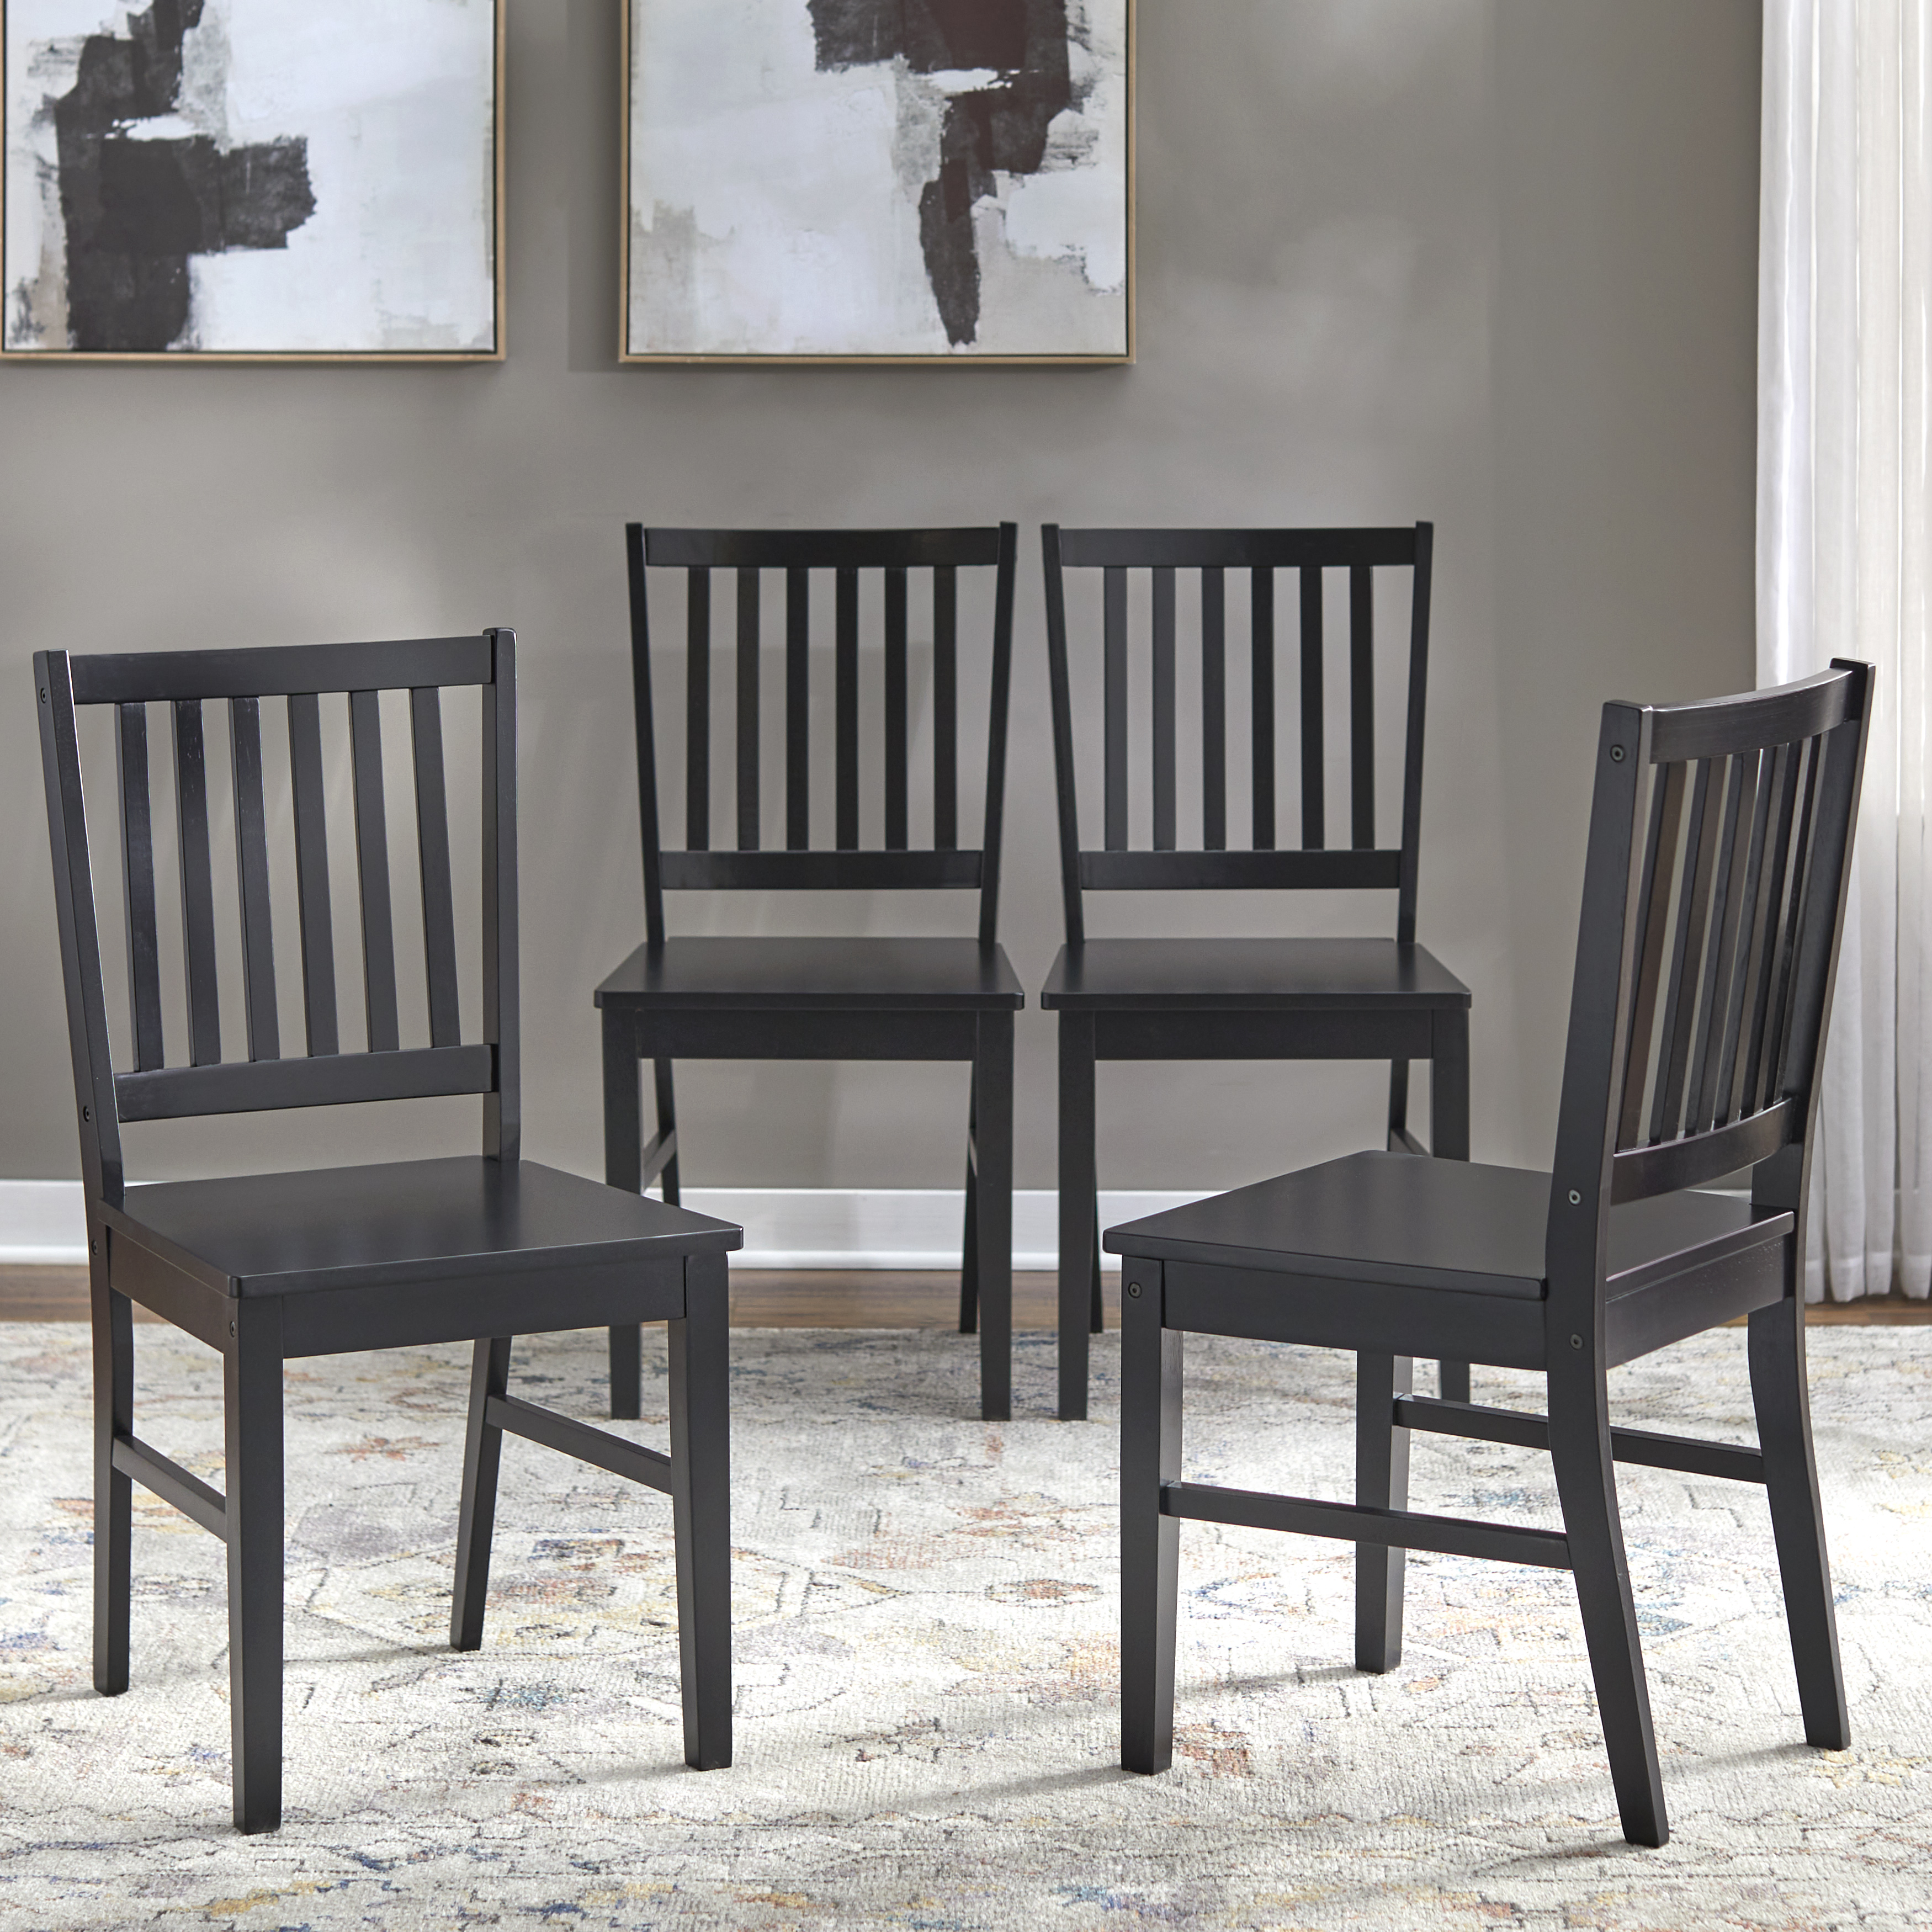 TMS Shaker Dining Indoor Wood Chair, Set of 4, Black - image 2 of 7